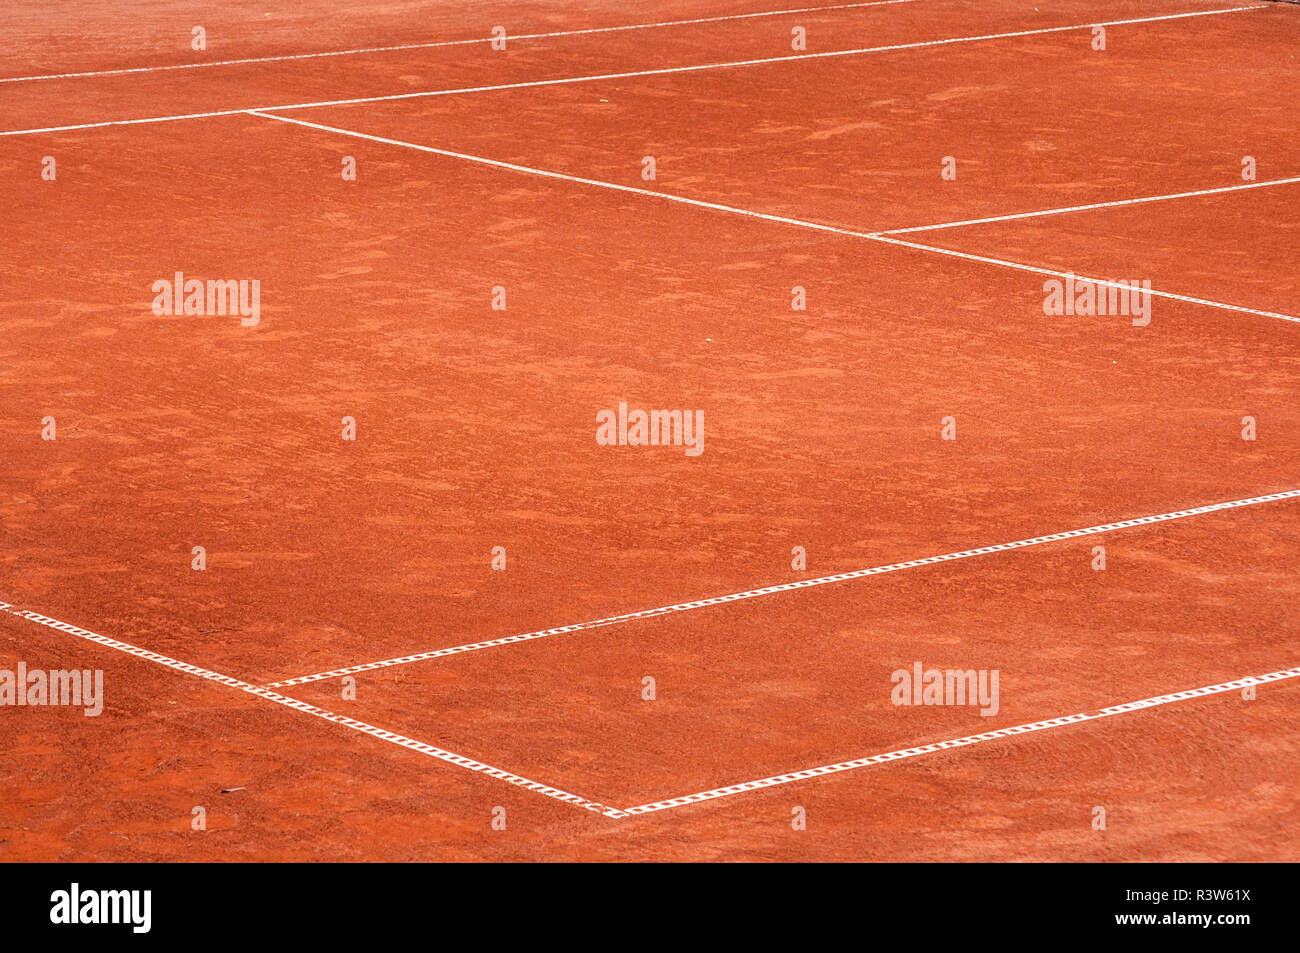 Part of empty used red clay tennis court playground surface with white lines closeup Stock Photo